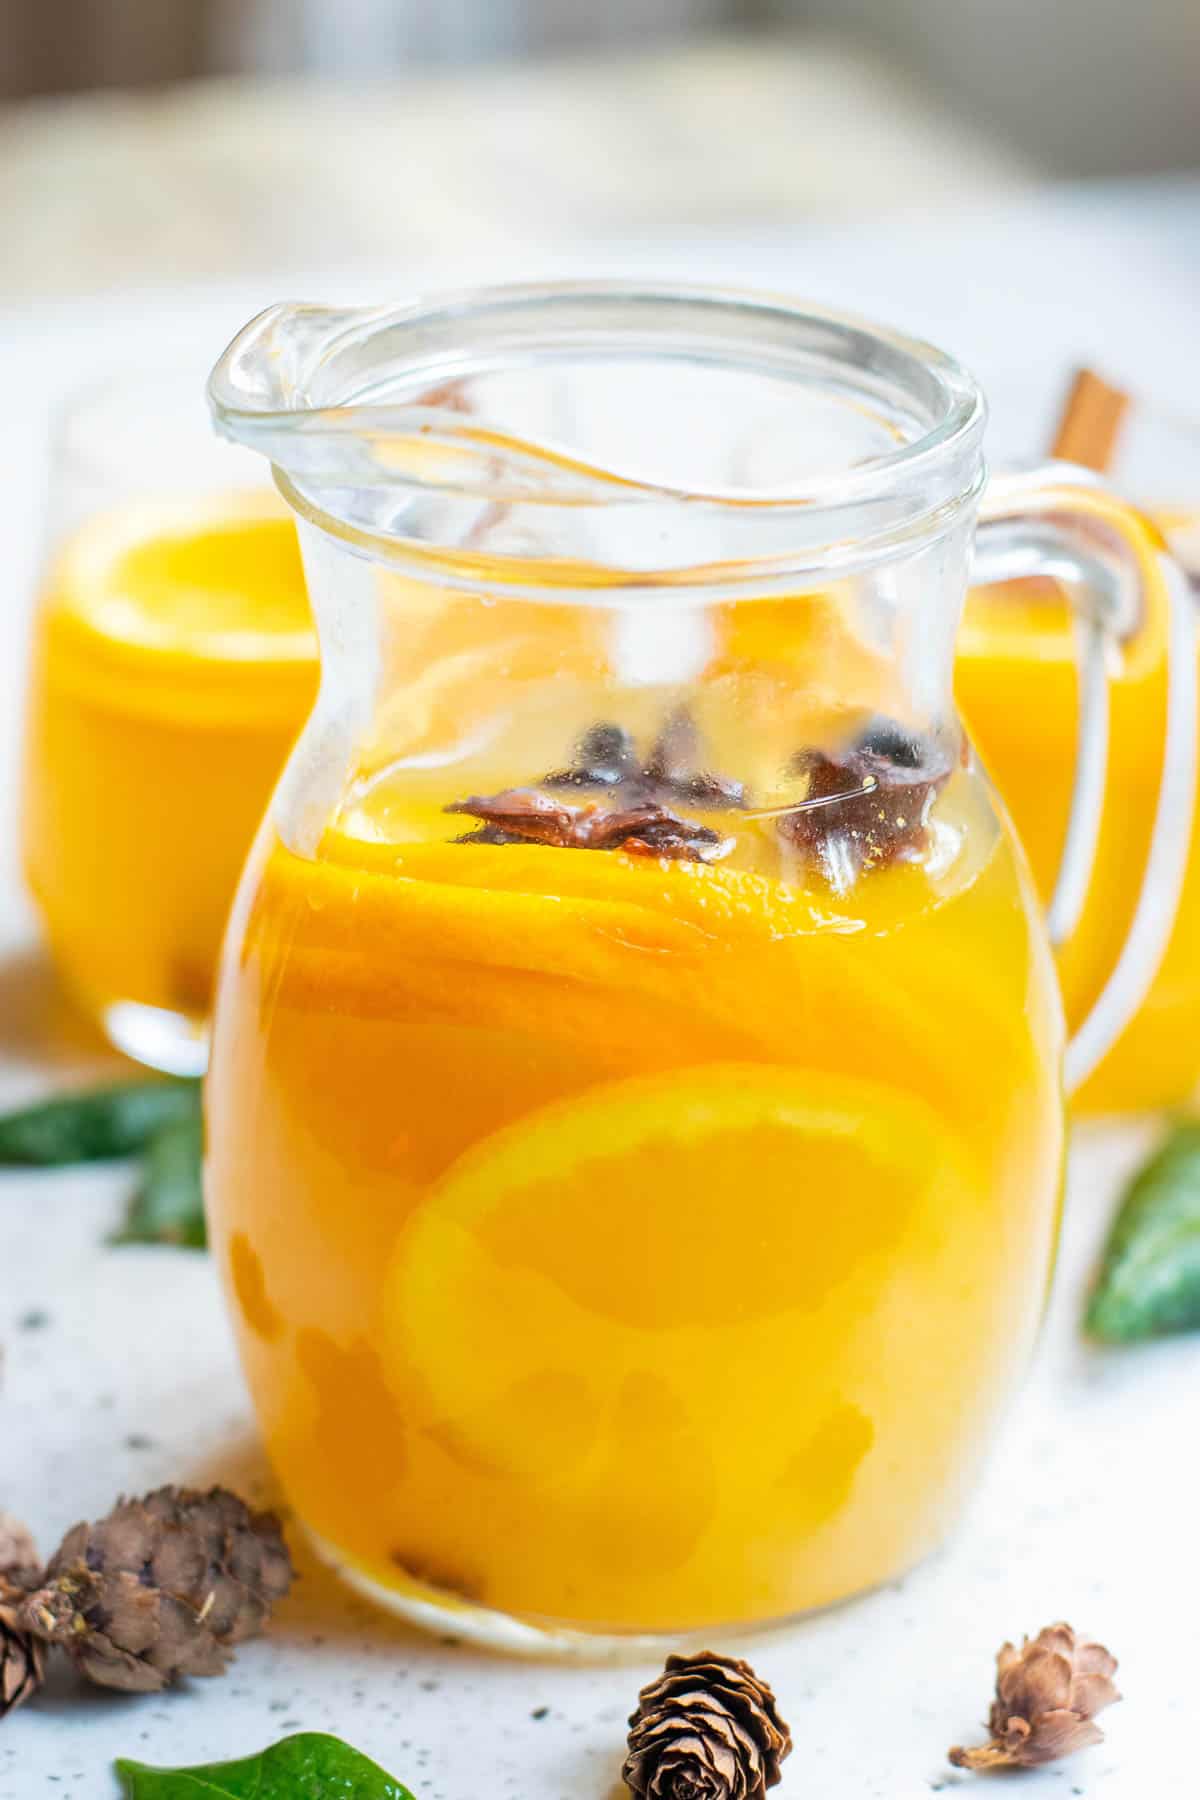 Pitcher of orange punch garnished with whole spices.